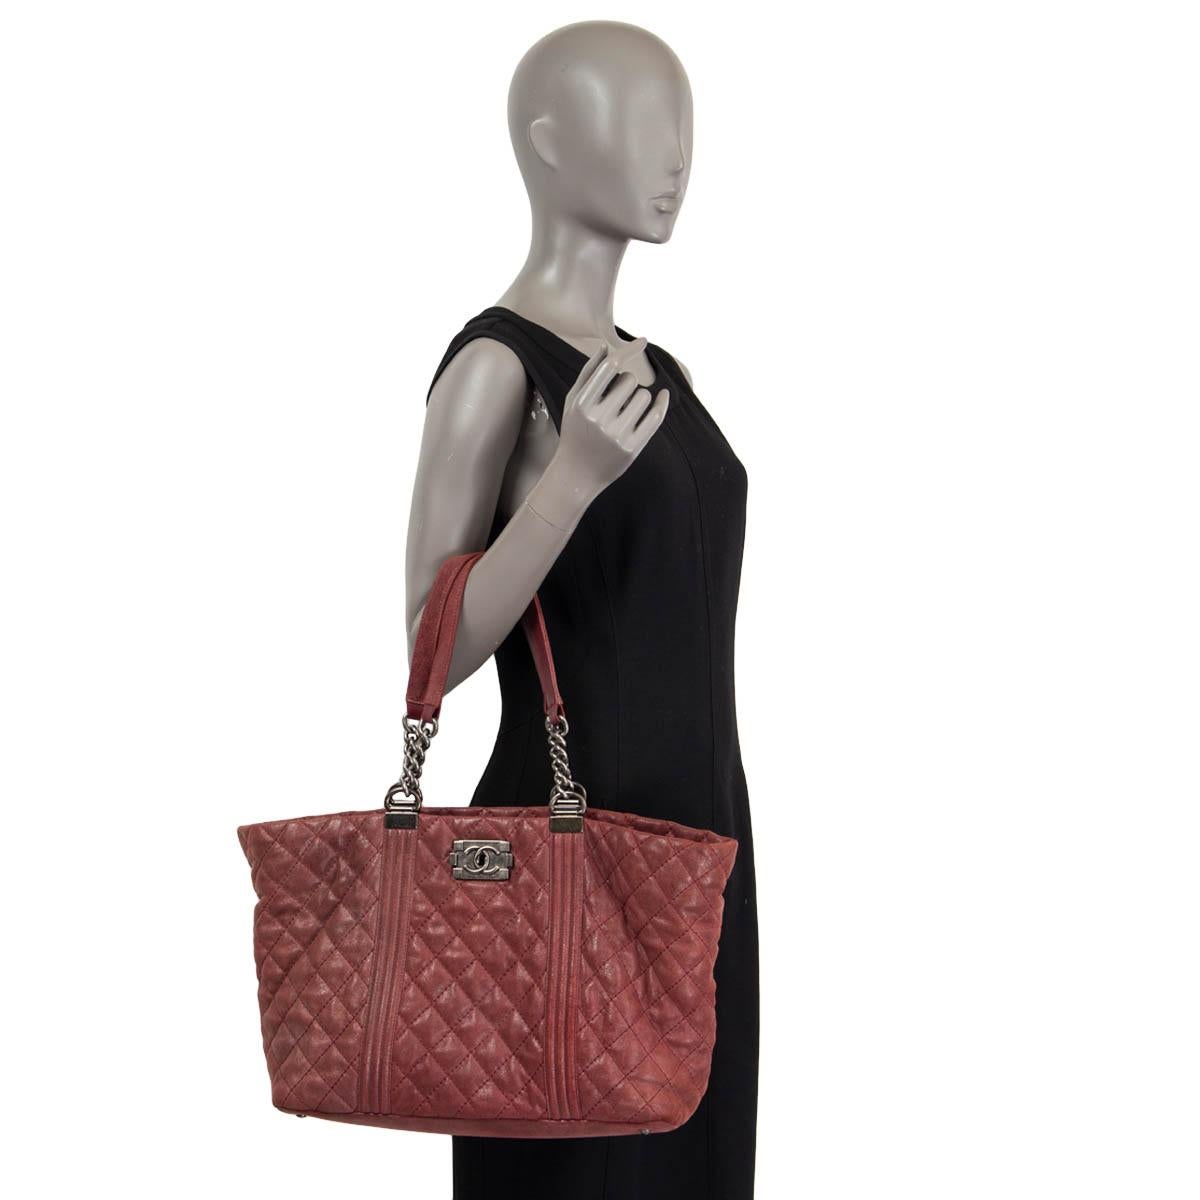 CHANEL burgundy iridescent leather GENTLE BOY Shopping Tote Bag For Sale 5